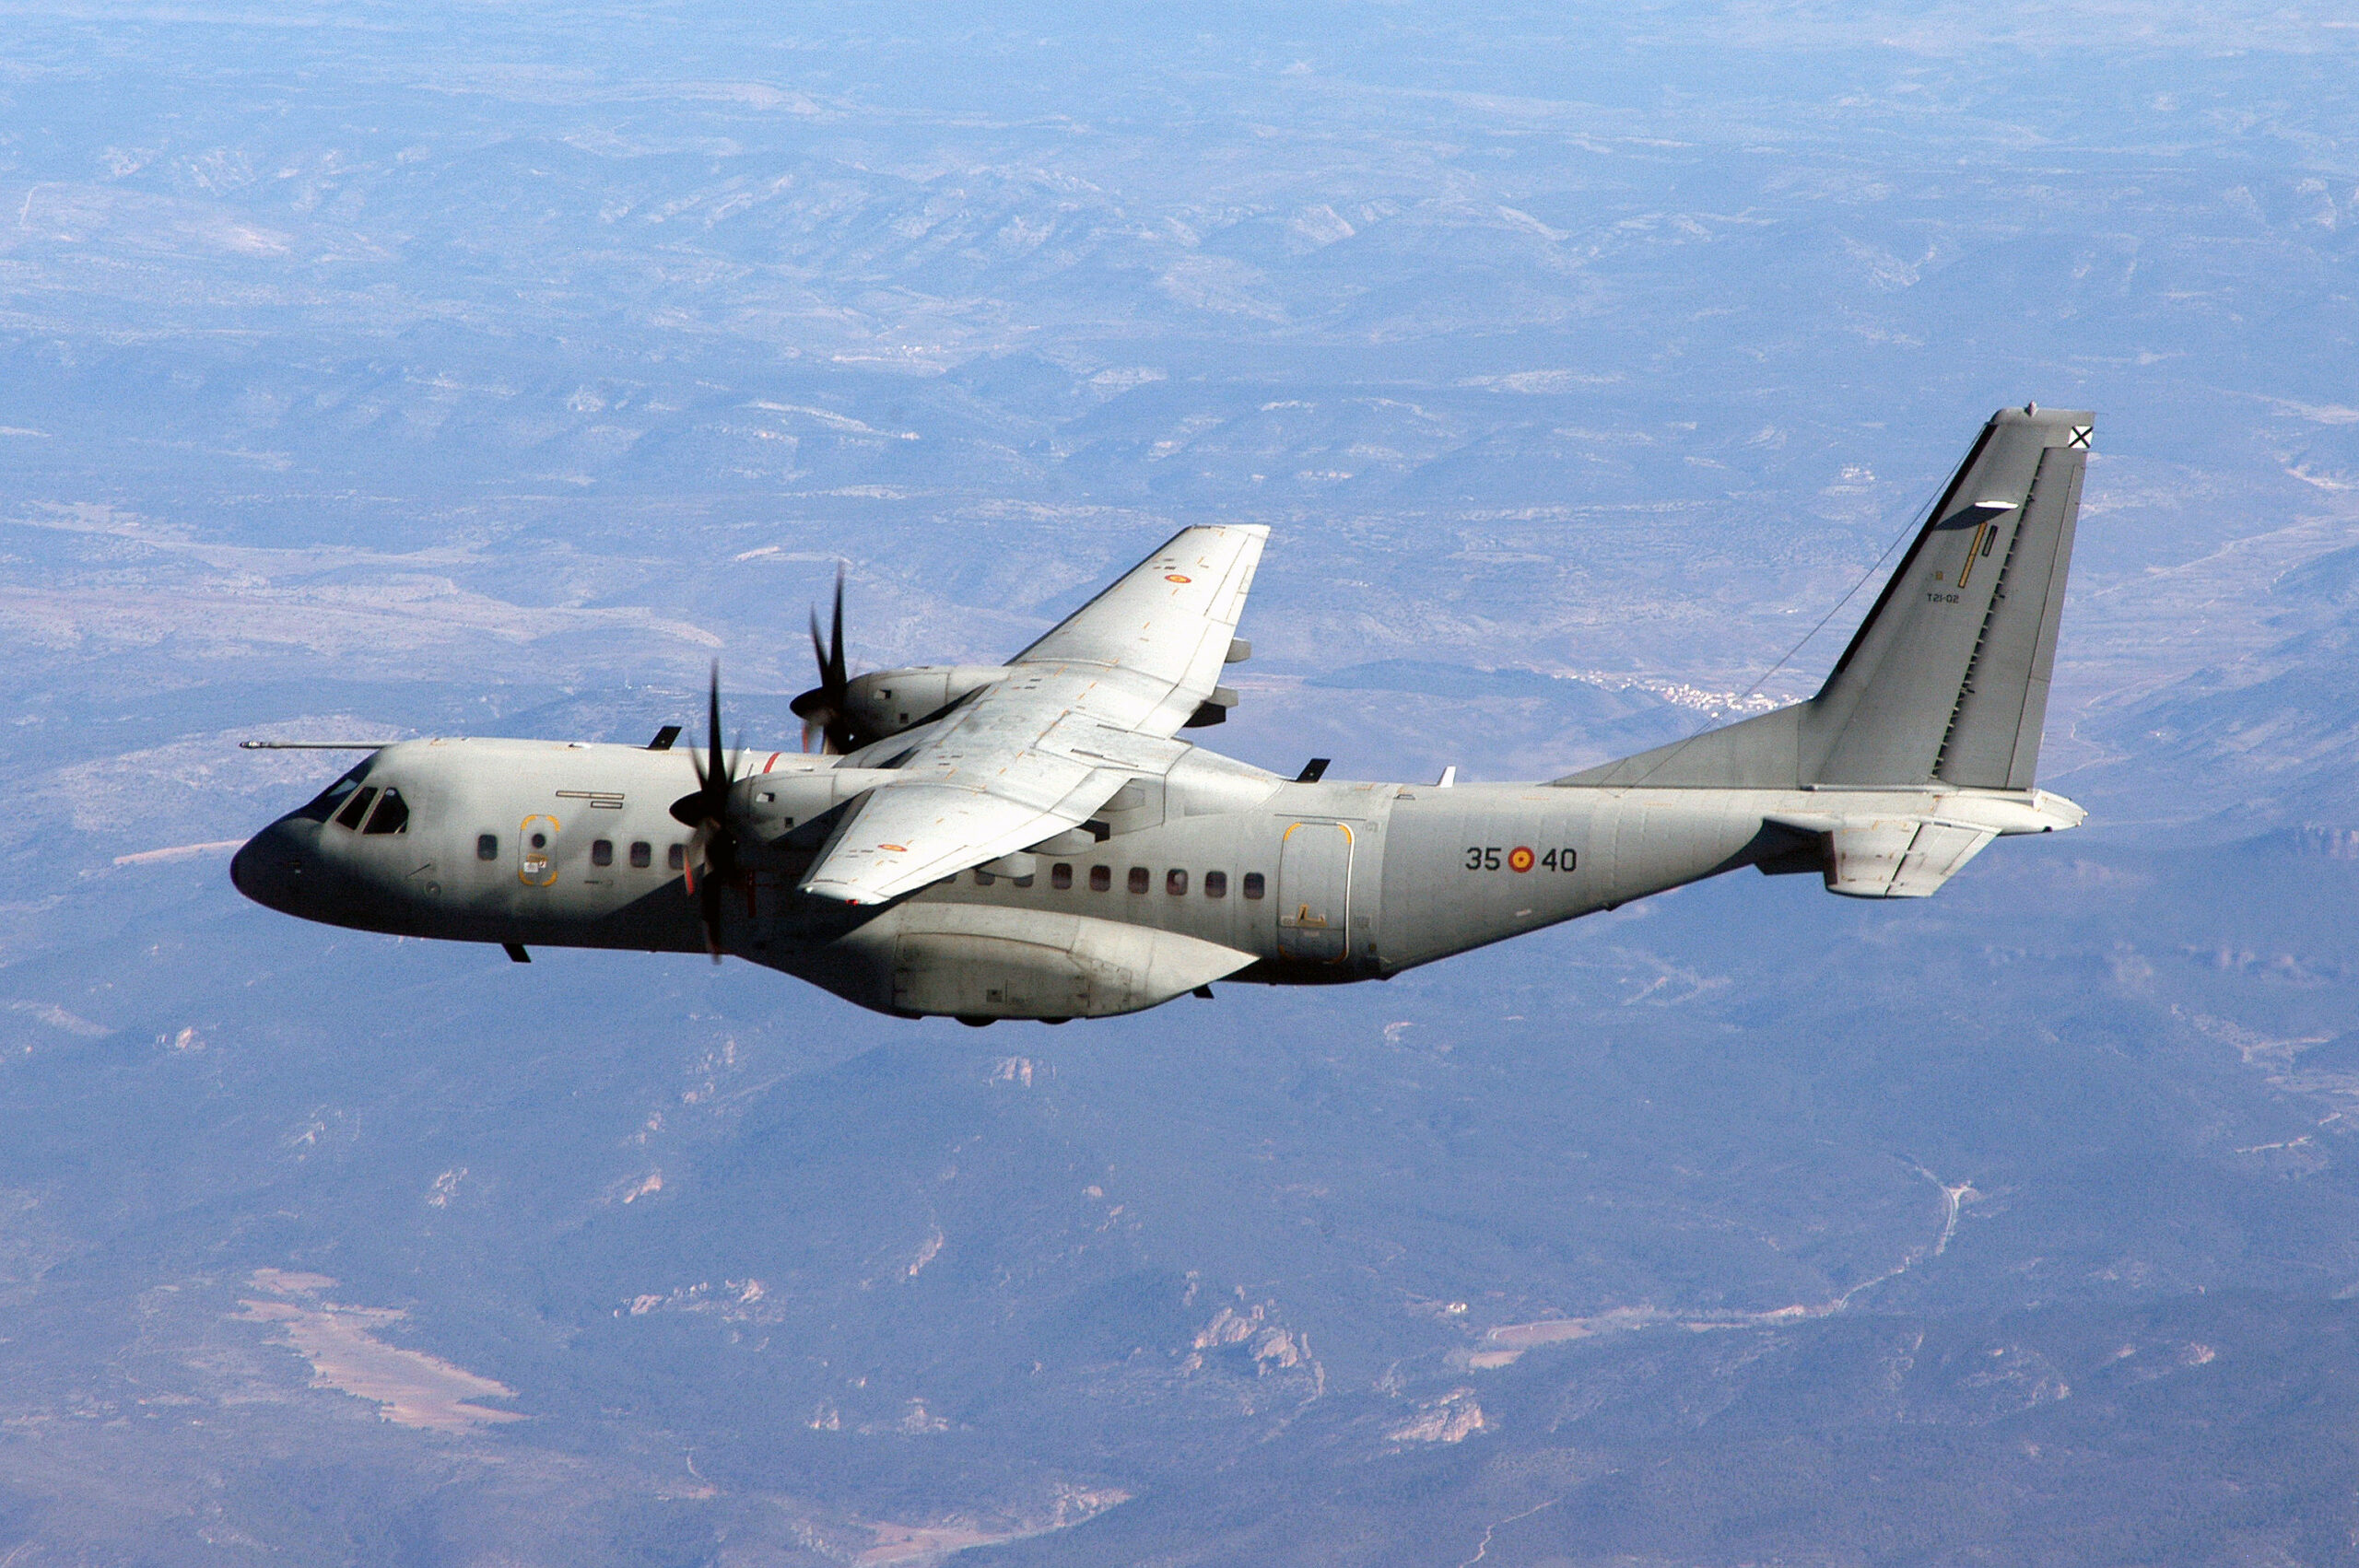 C295 military airlifter